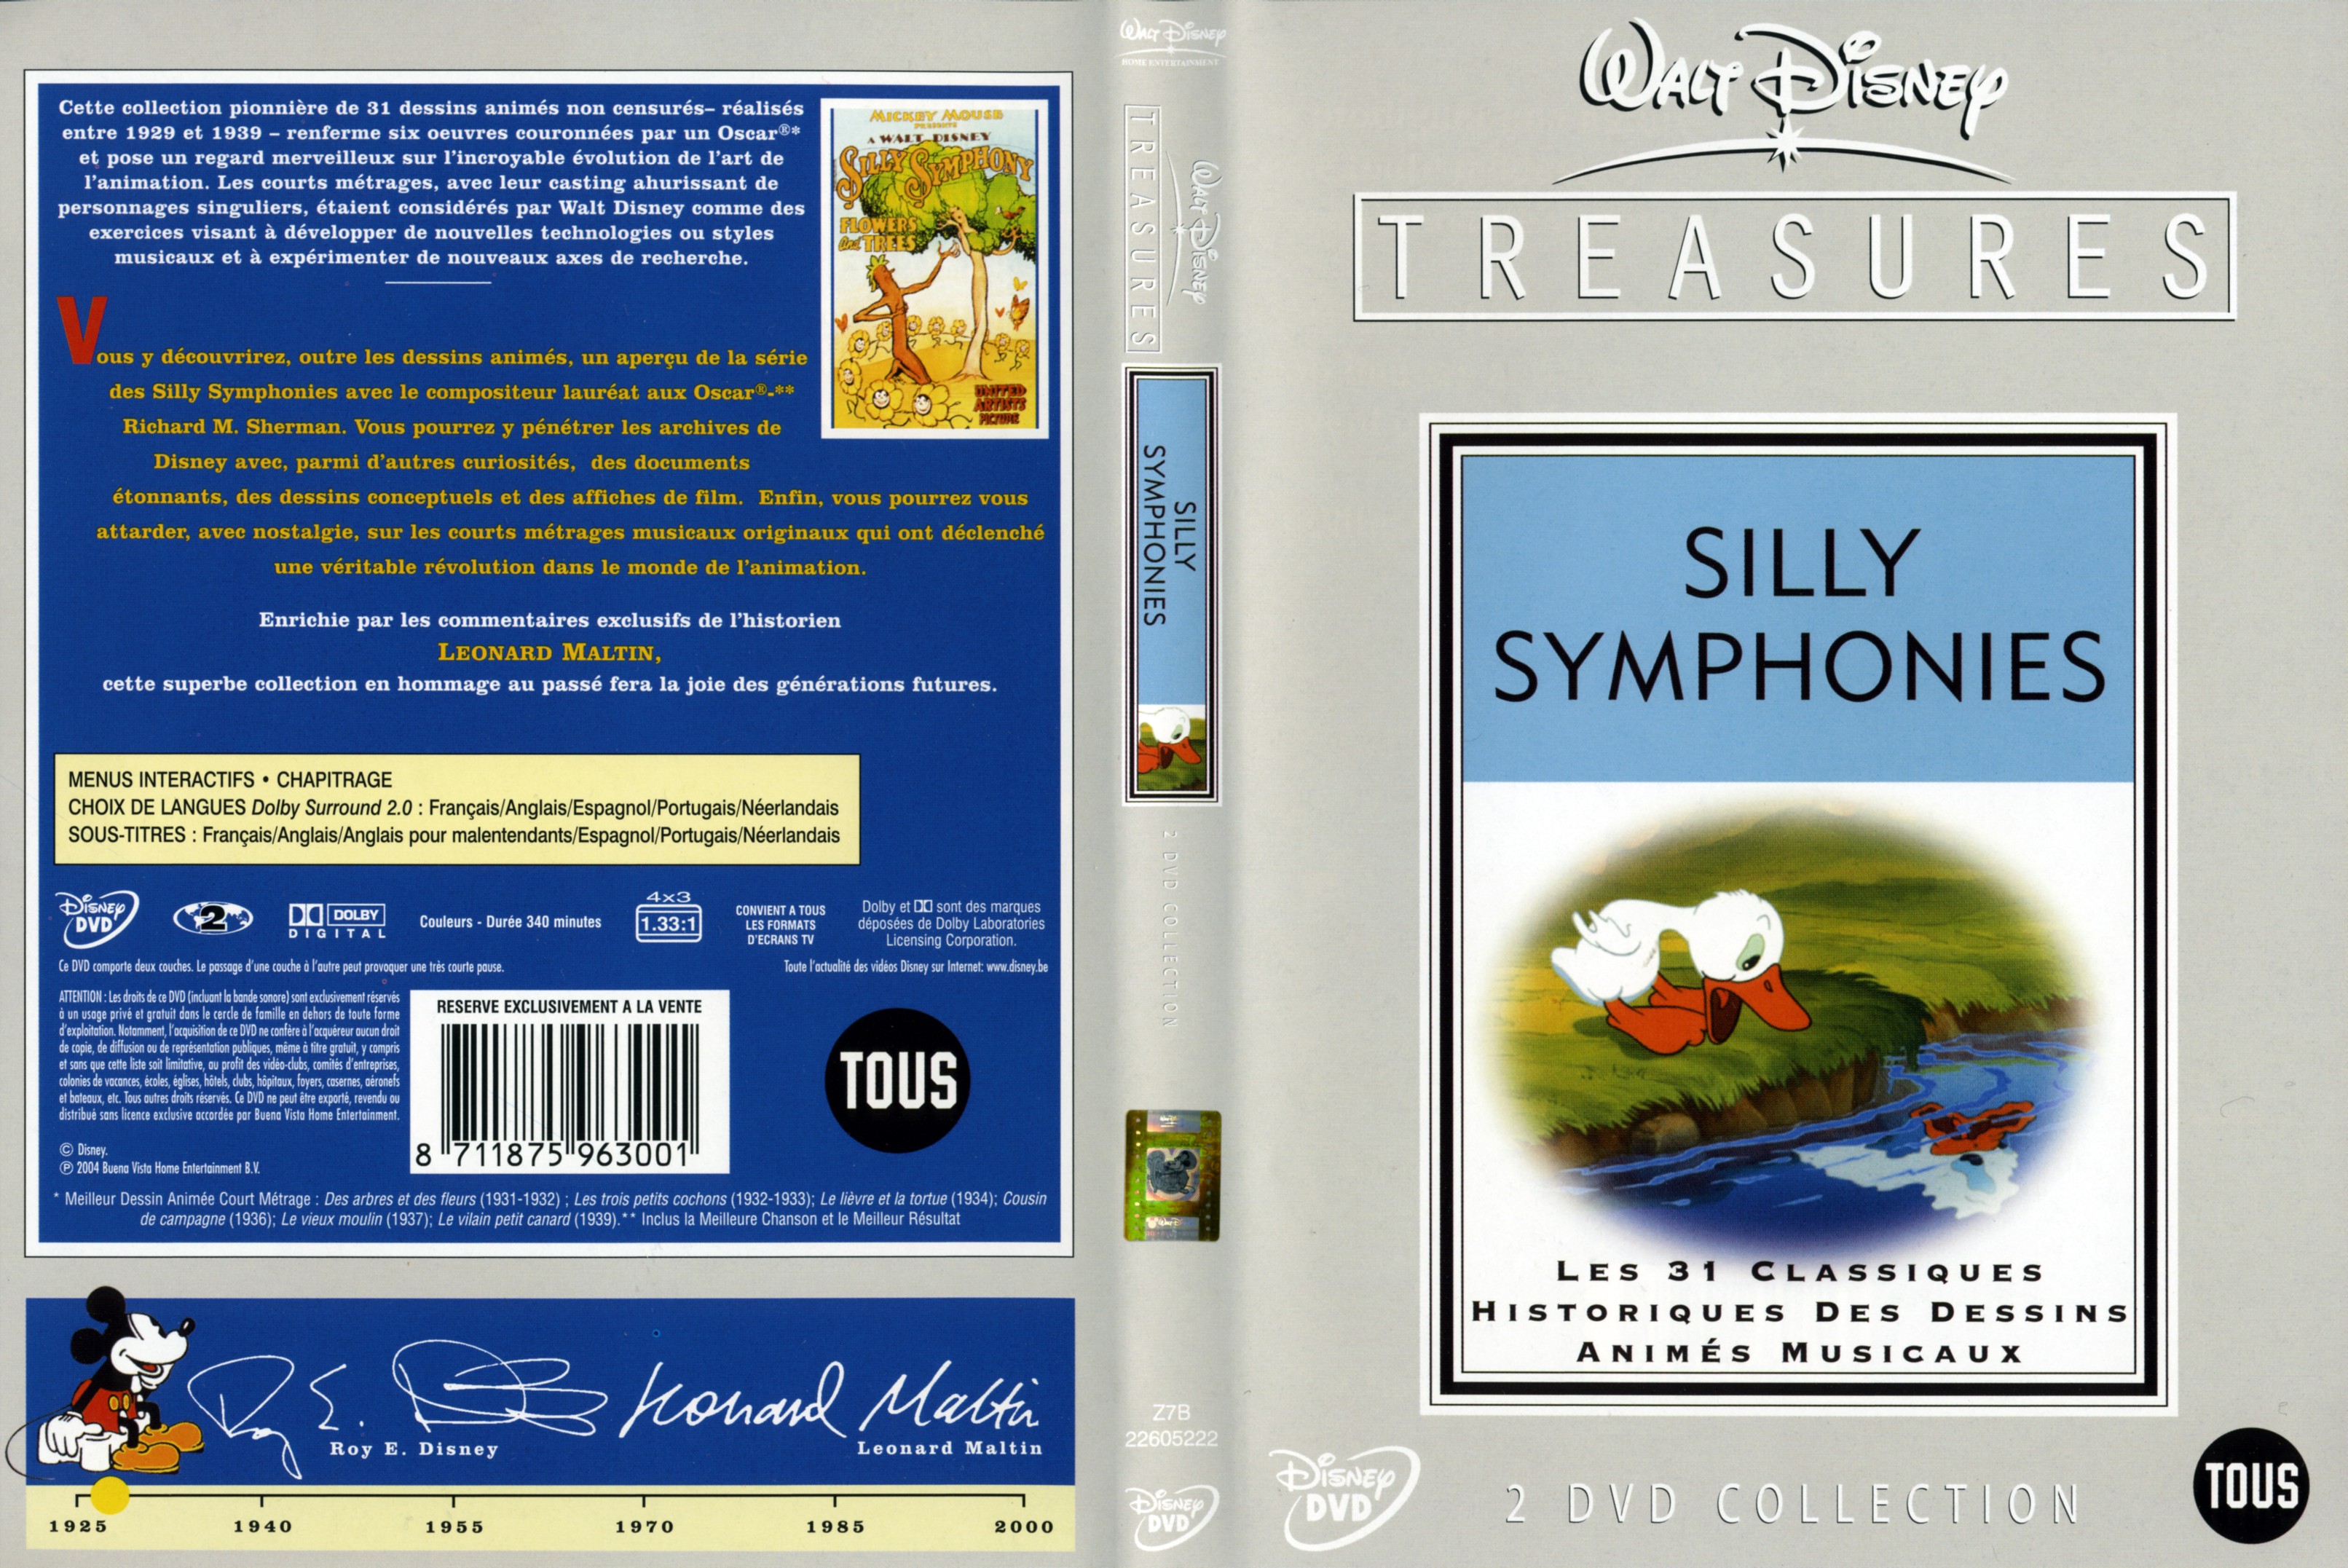 Jaquette DVD Silly symphonies